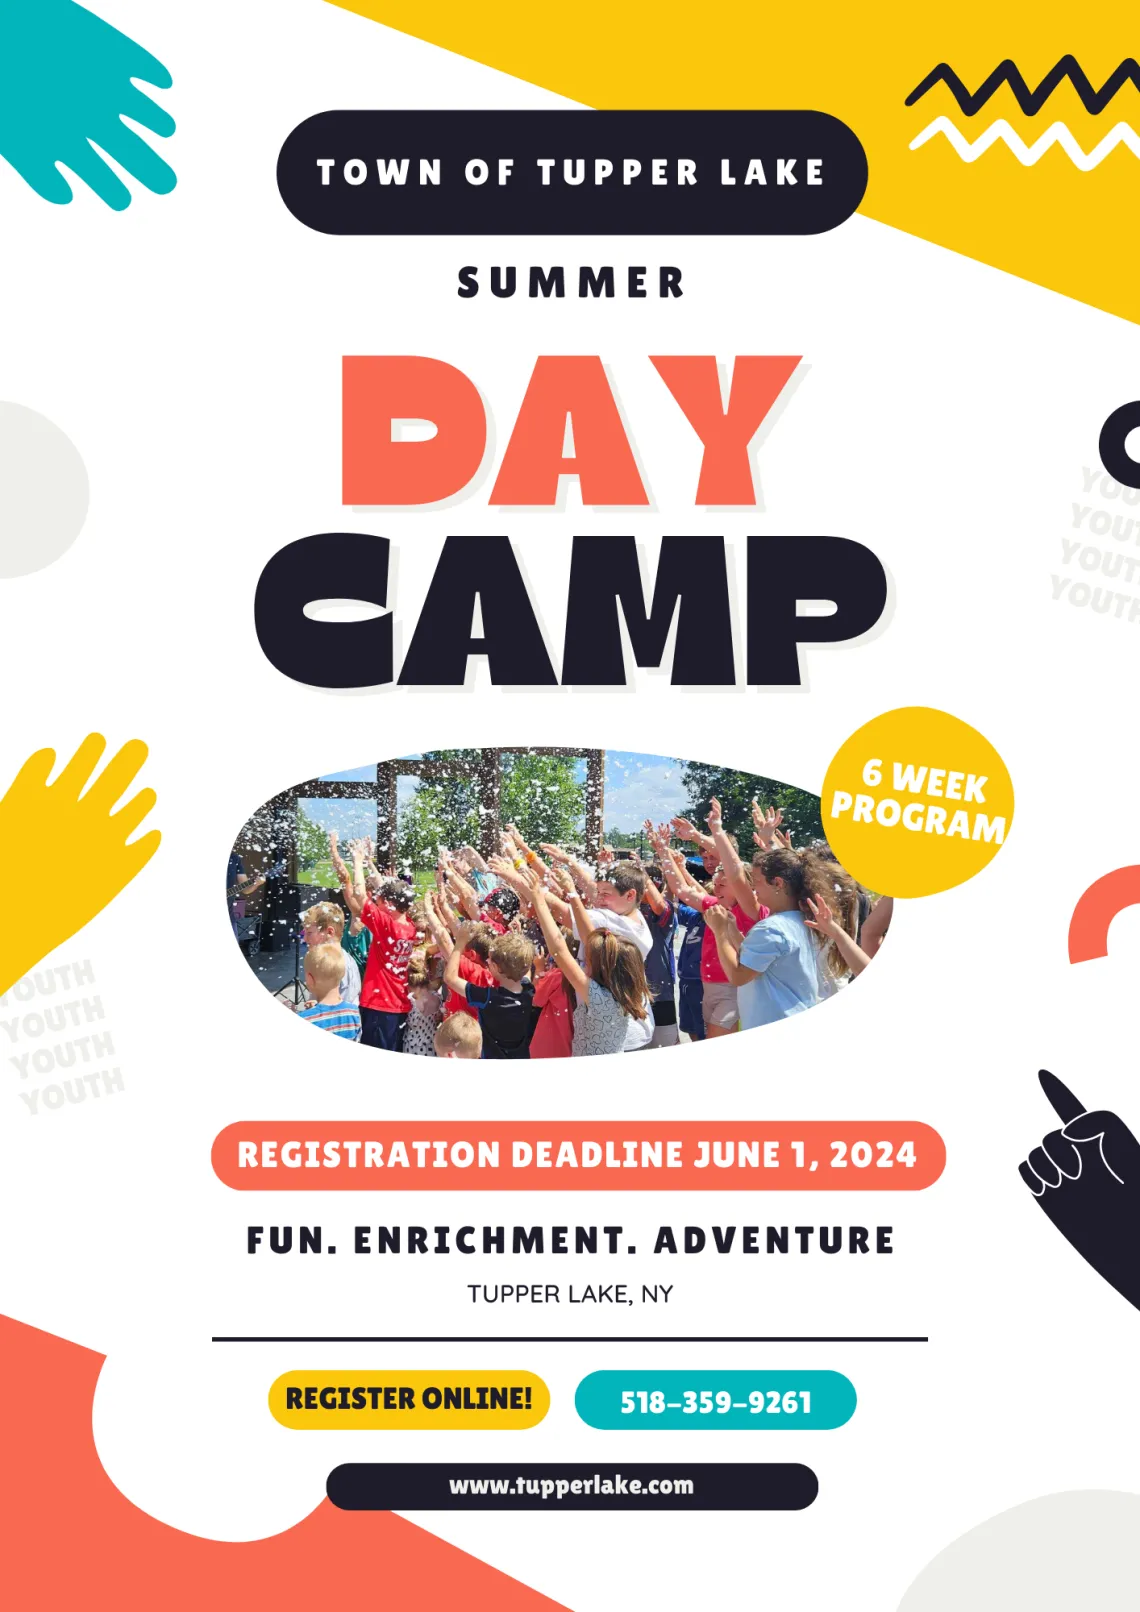 Illustrated flyer advertising summer day camp for children in Tupper Lake.